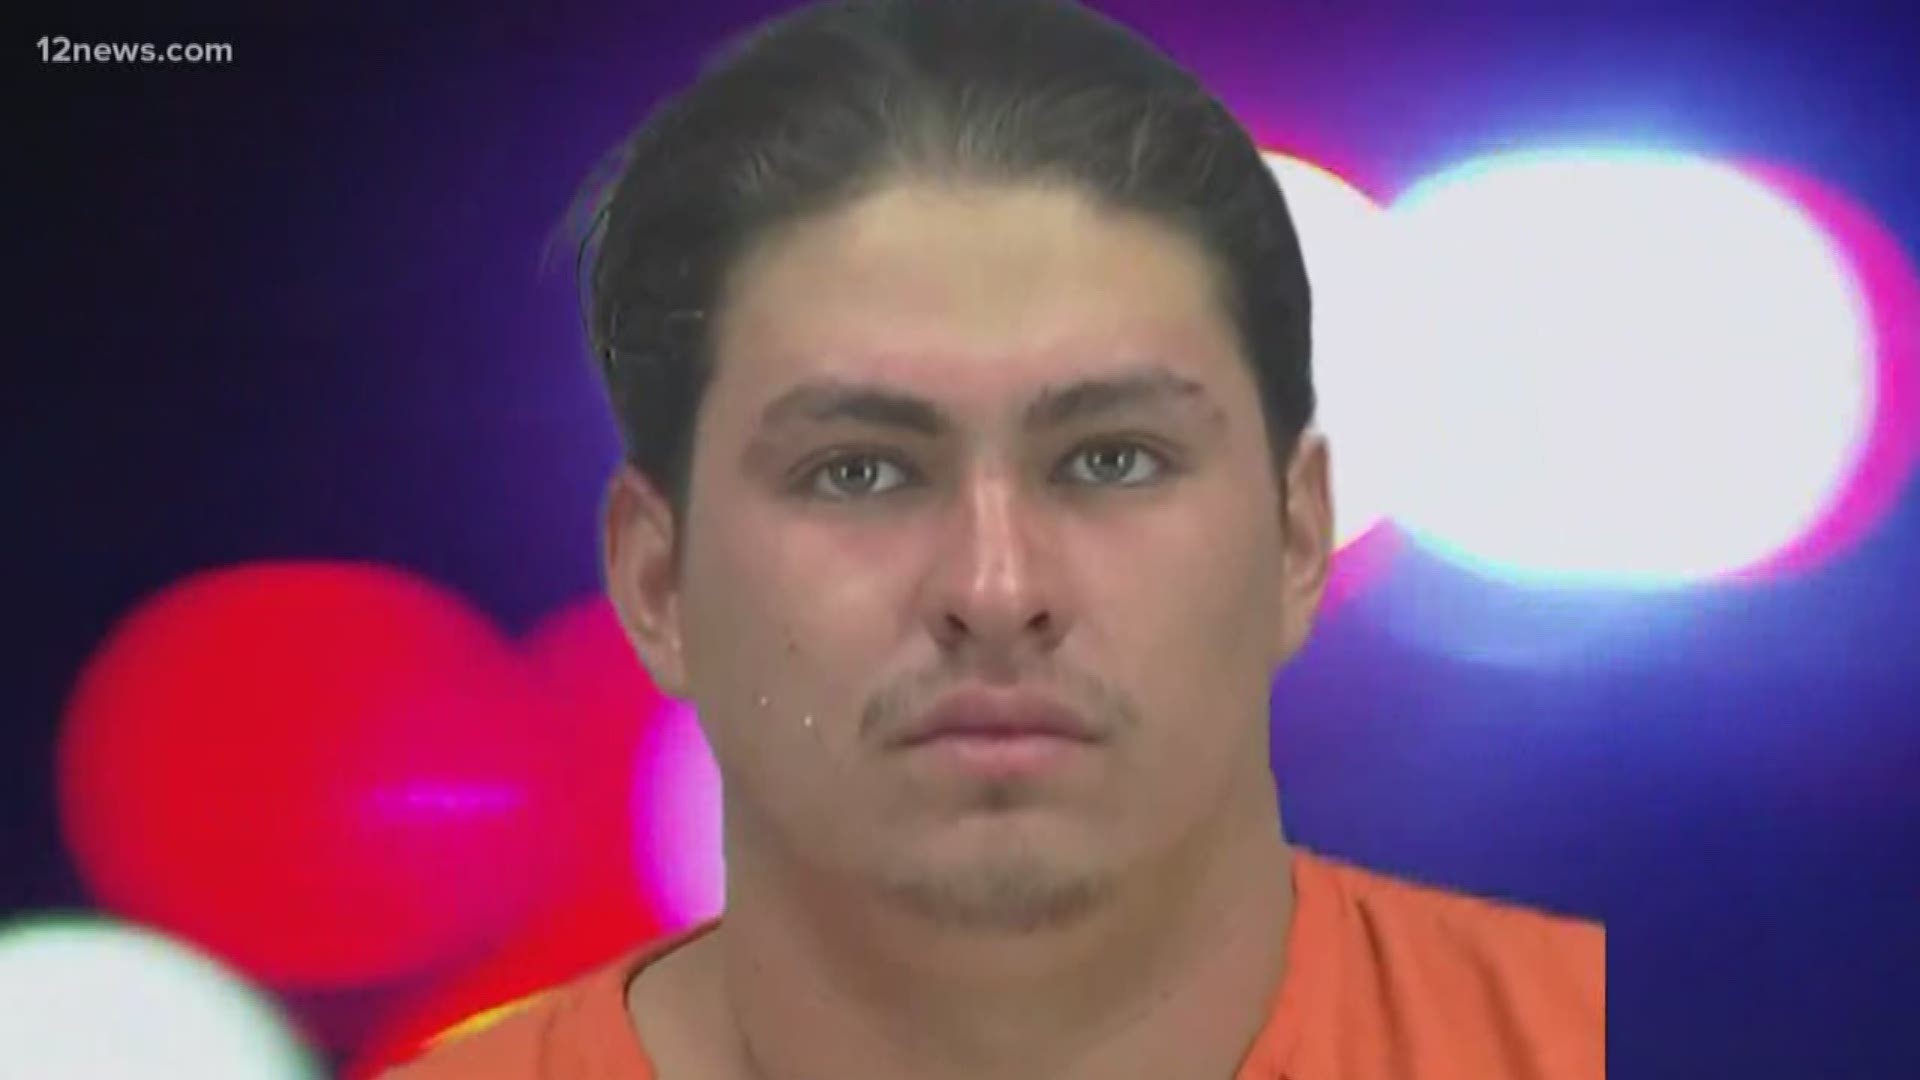 Court documents reveal that the suspect, Javier Figueroa, recently served time for drugs and weapons charges. Documents also reveal that he told investigators the shooting was an accident.